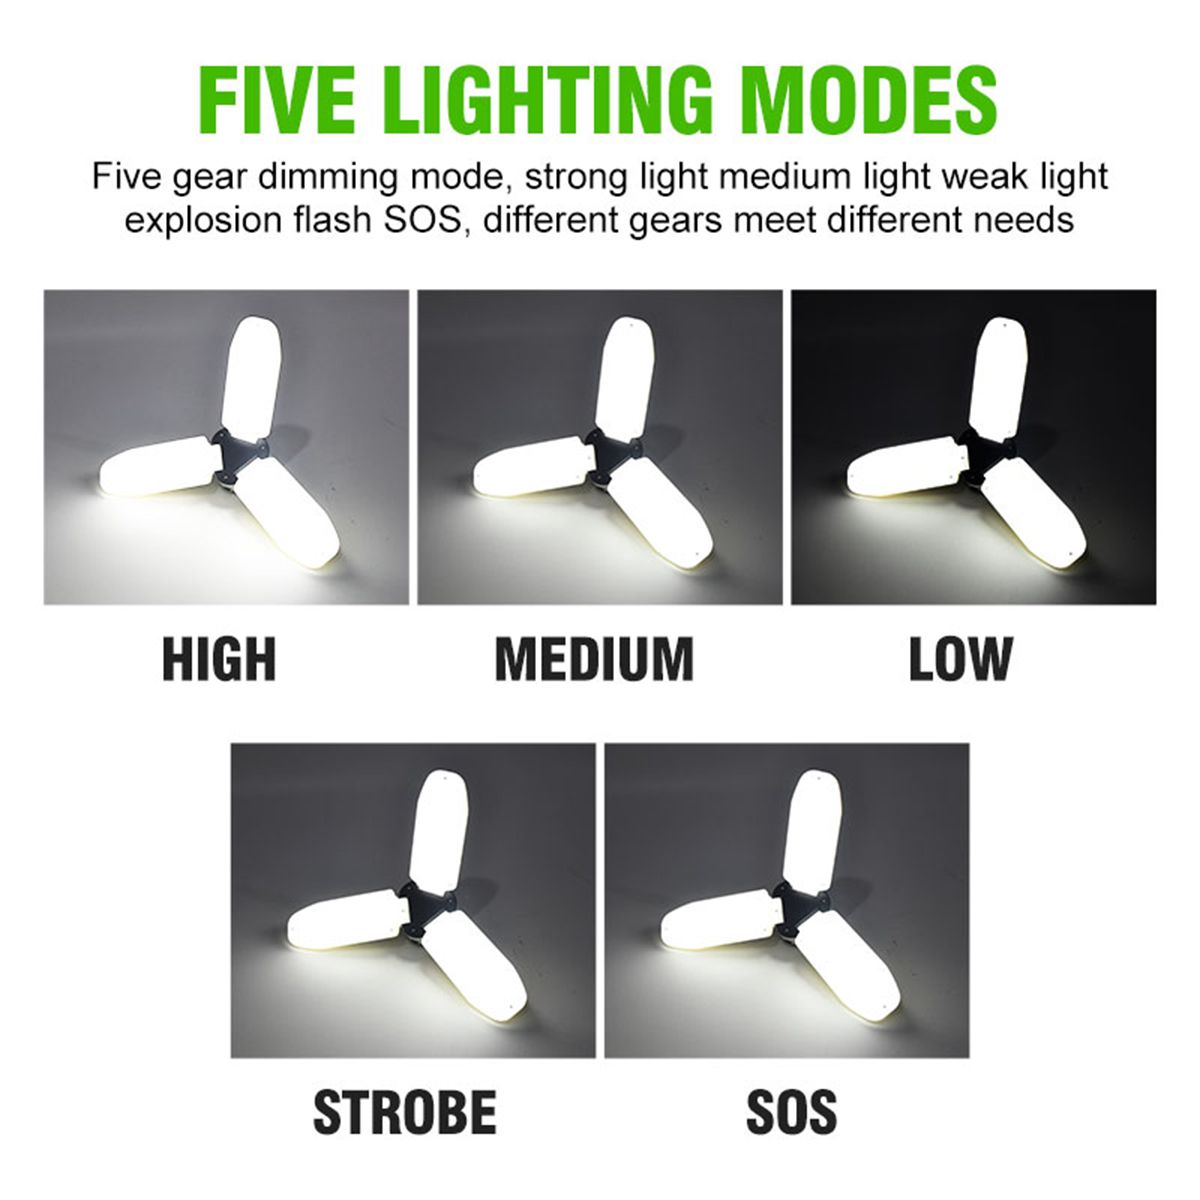 60W-E27-LED-Solar-Light-Bulb-SMD5730-Foldable-Three-Leaves-Outdoor-Camping-Tent-Lamp-with-USB-Cable--1681716